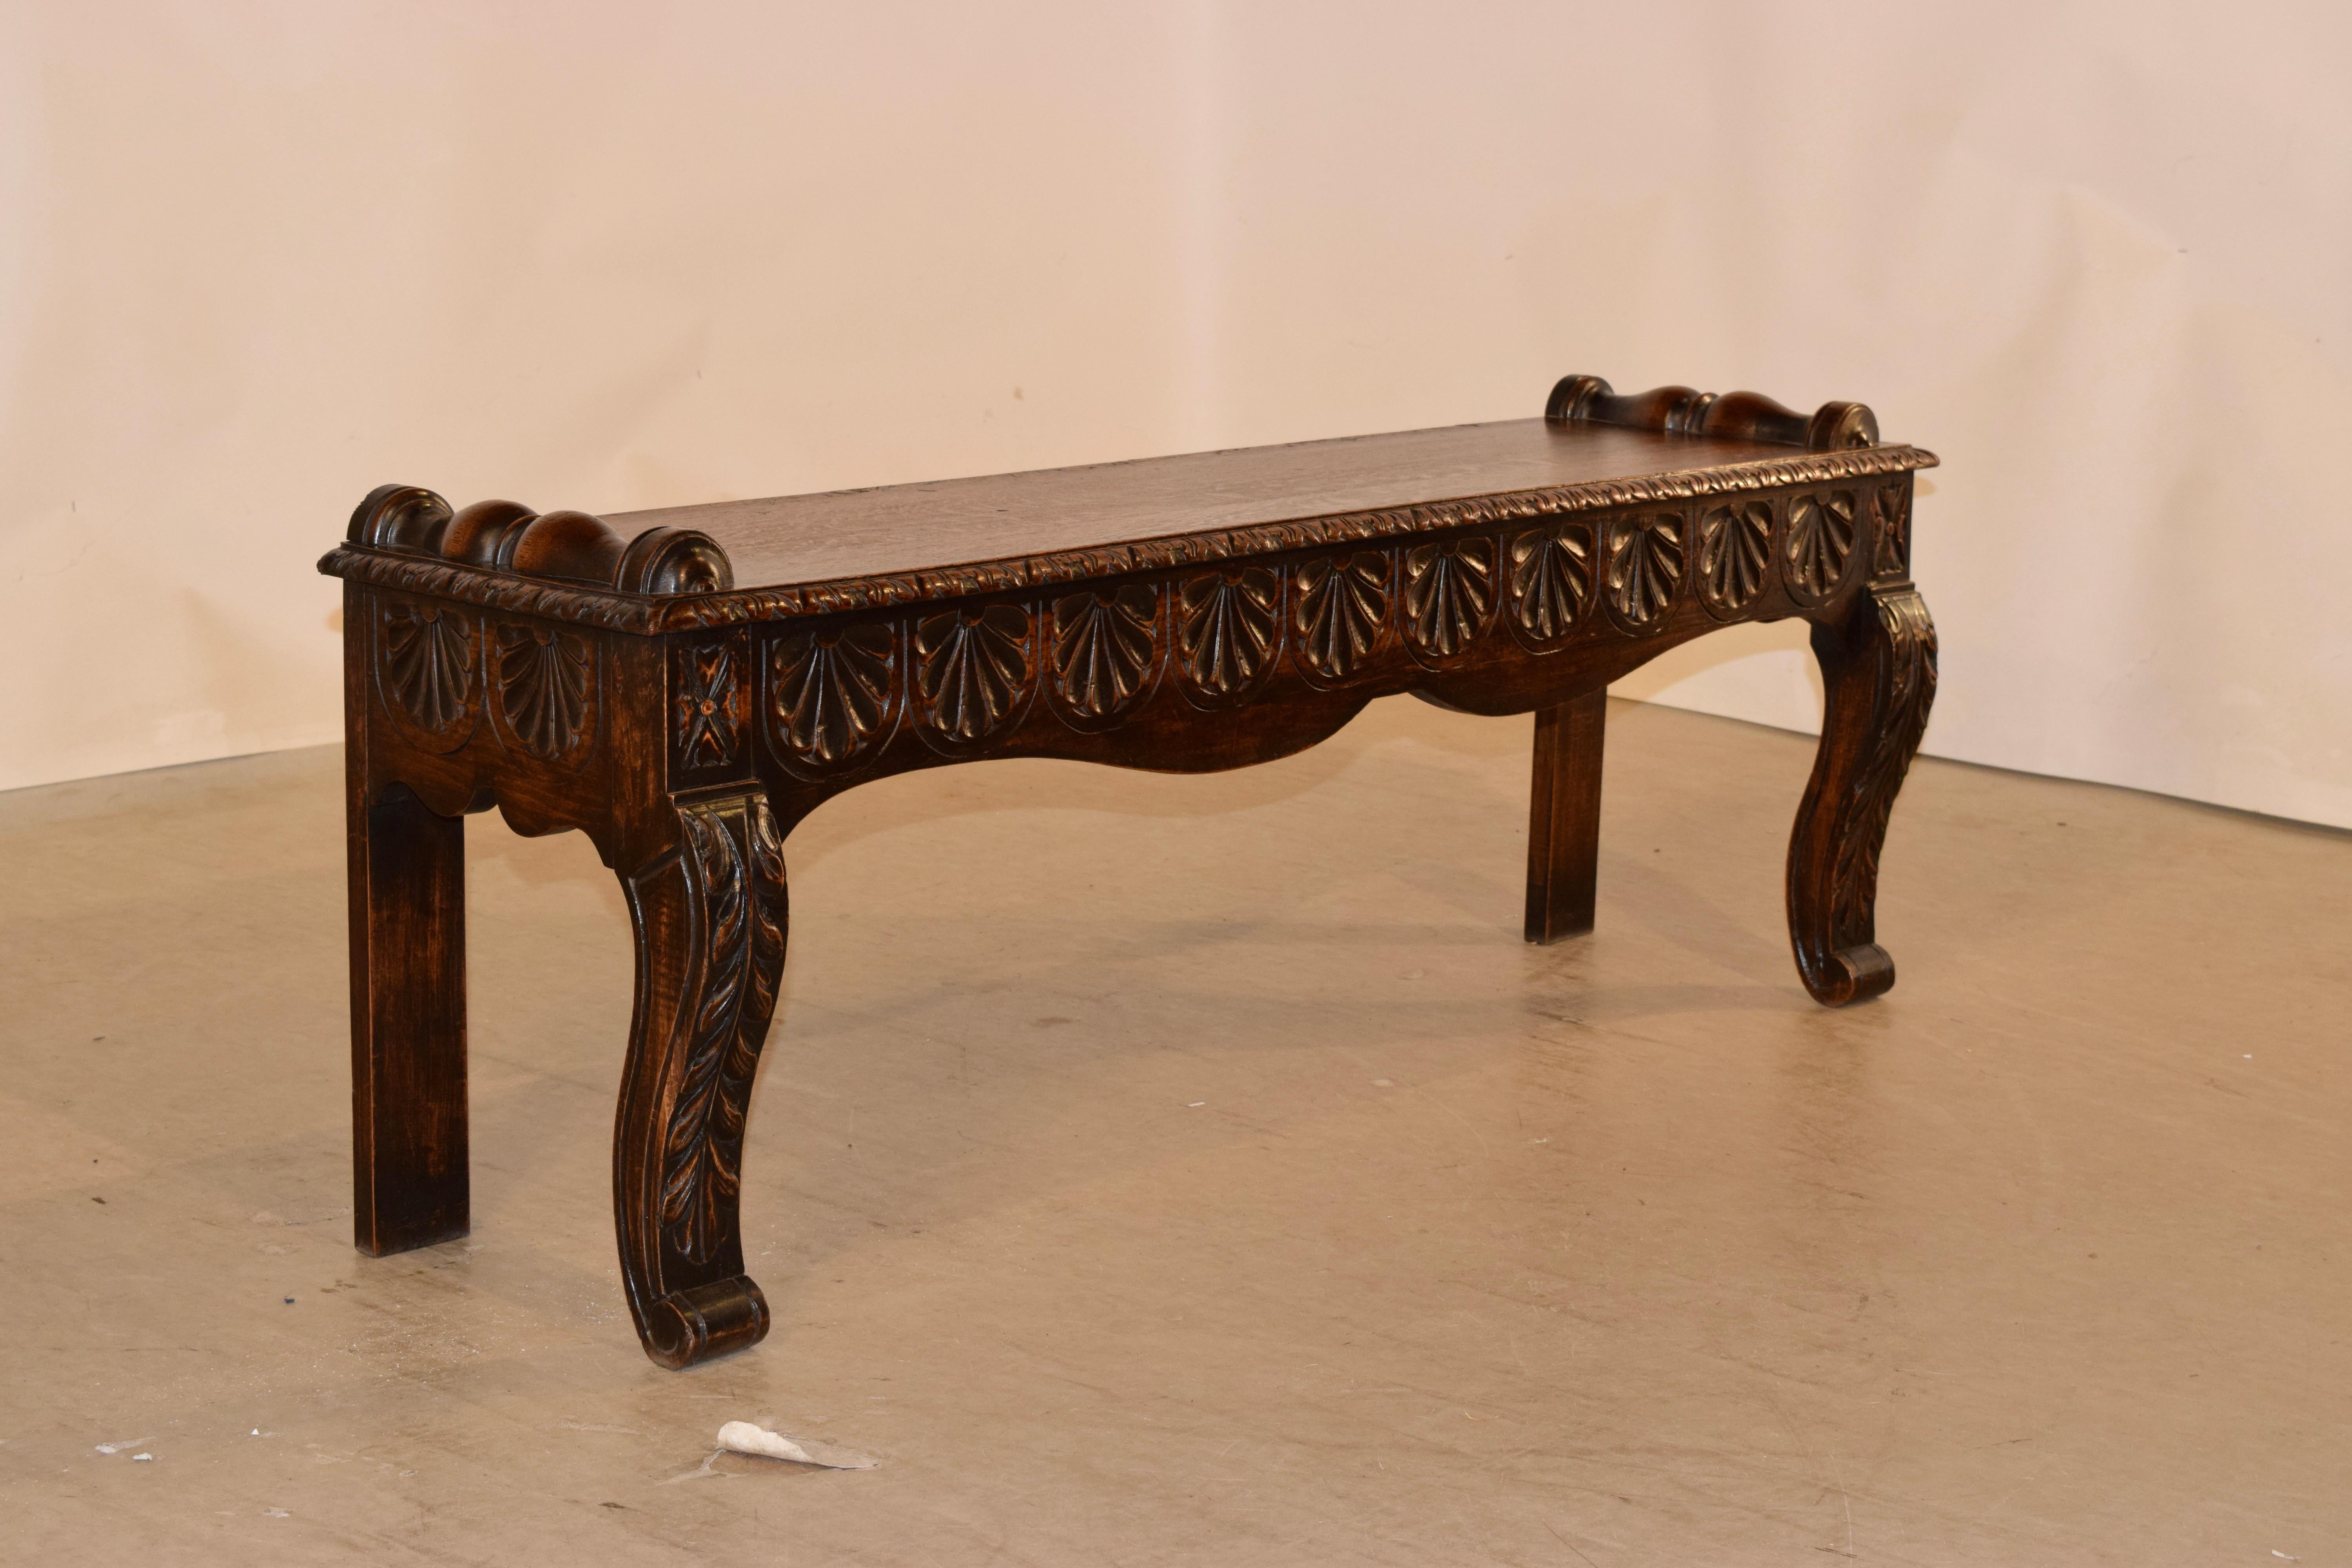 19th century oak window seat from France with a carved and beveled edge around the seat and half applied turnings on the top. The apron is hand scalloped and carved decorated, over simple legs in the back for easy placement against a wall and hand